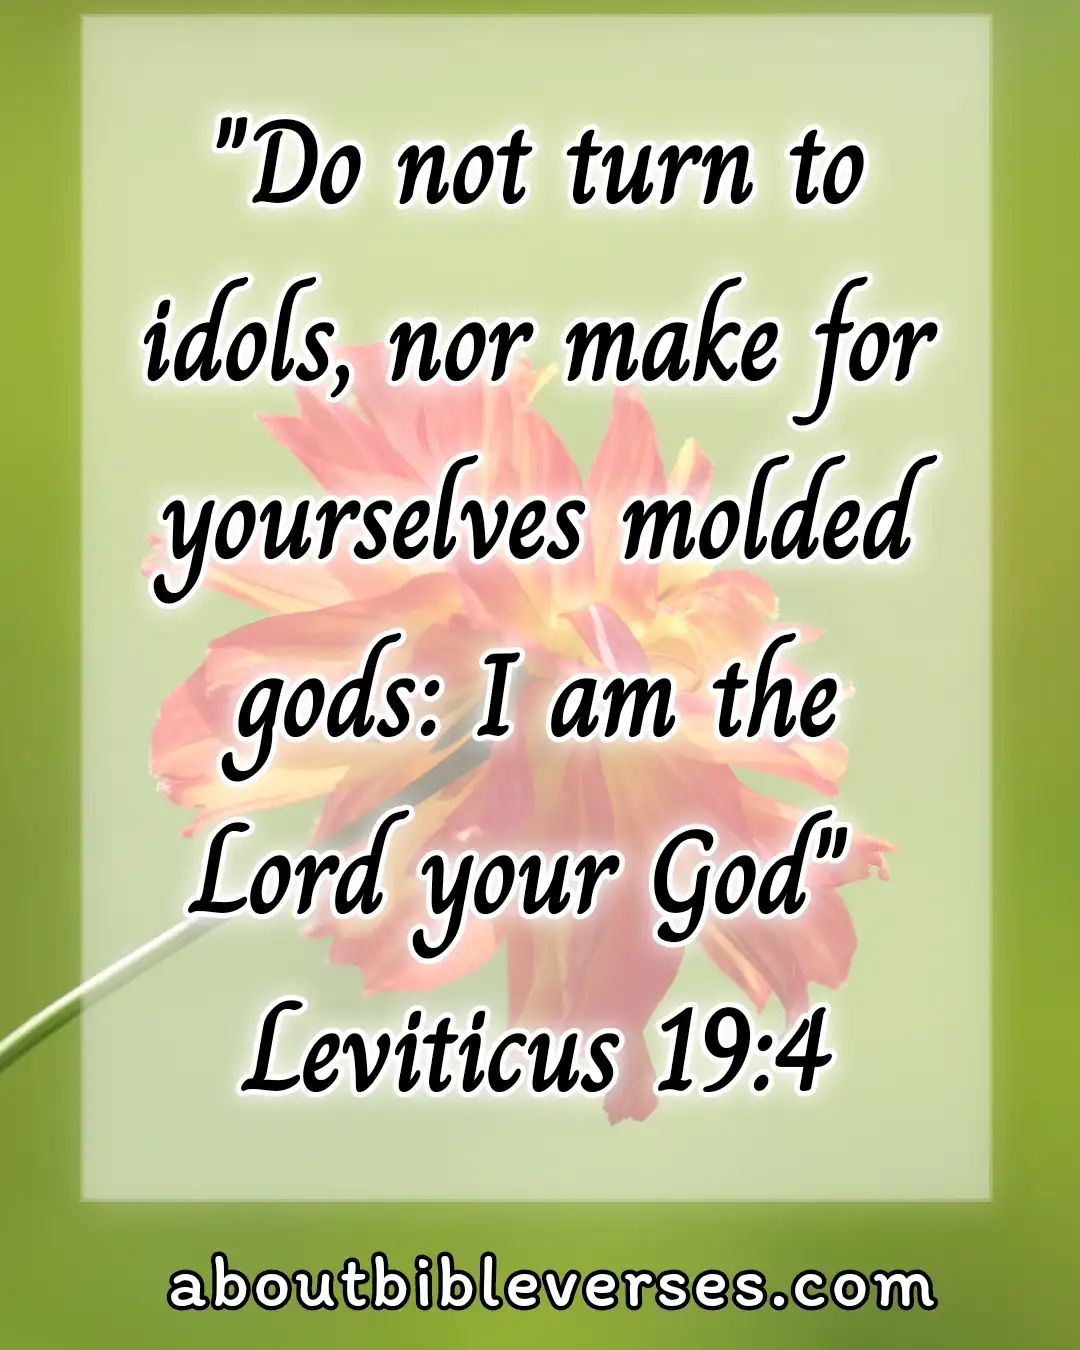 bible verses about idolatry (Leviticus 19:4)